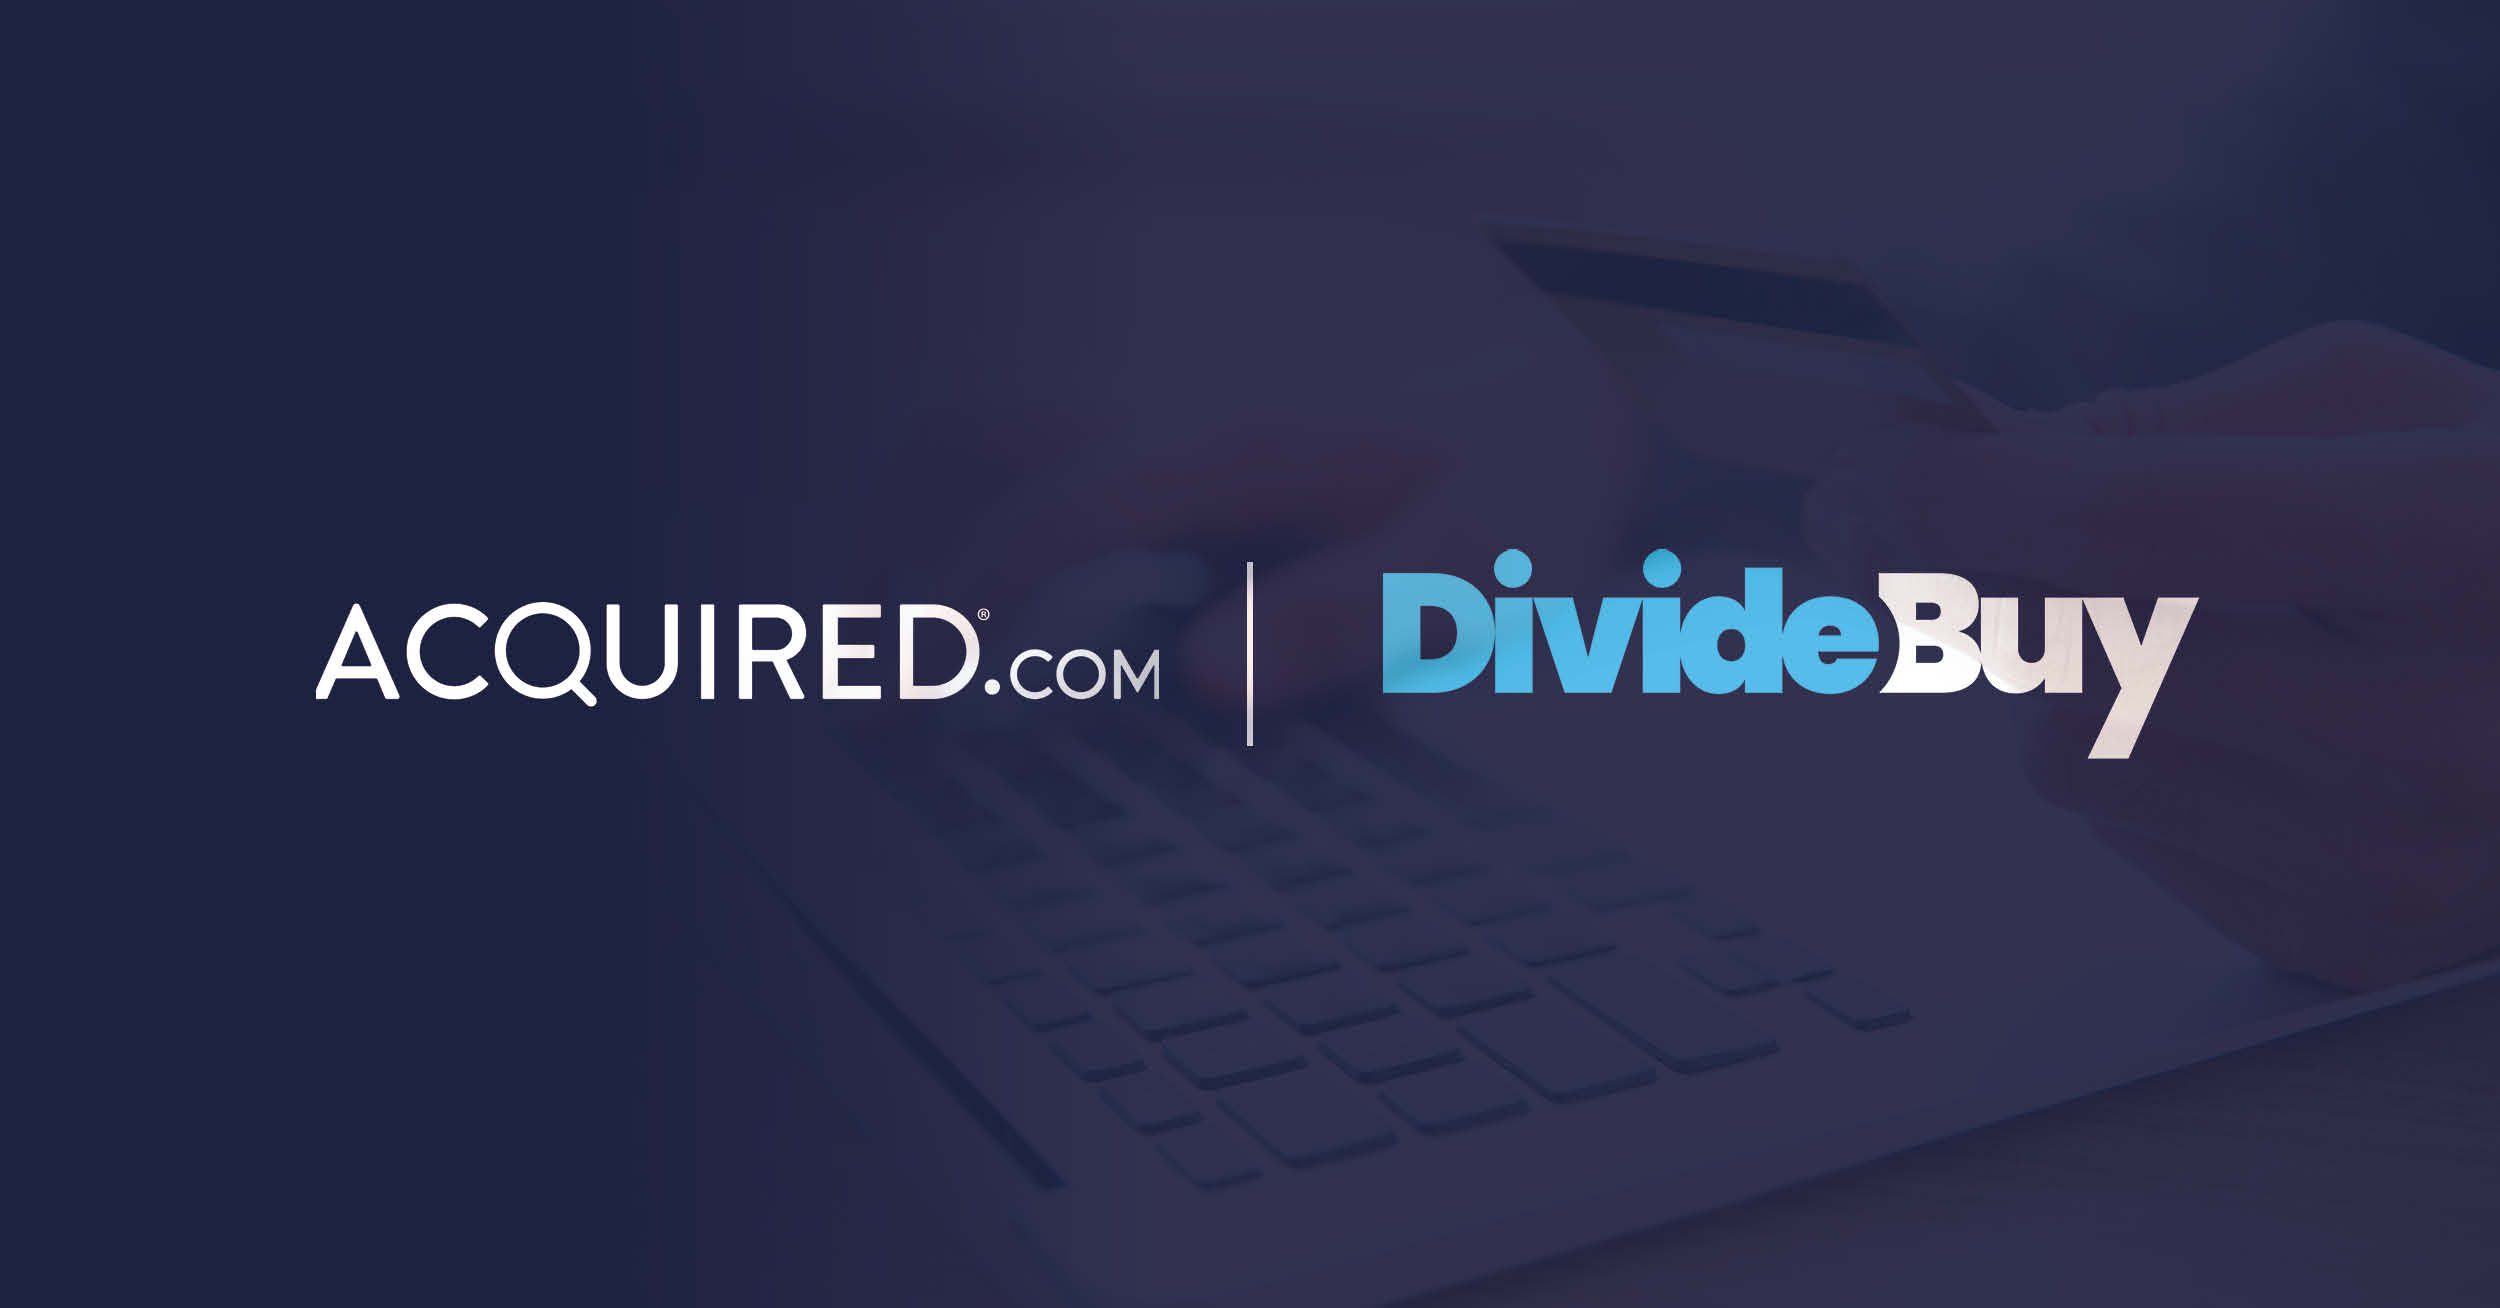 Acquired.com x DivideBuy PR